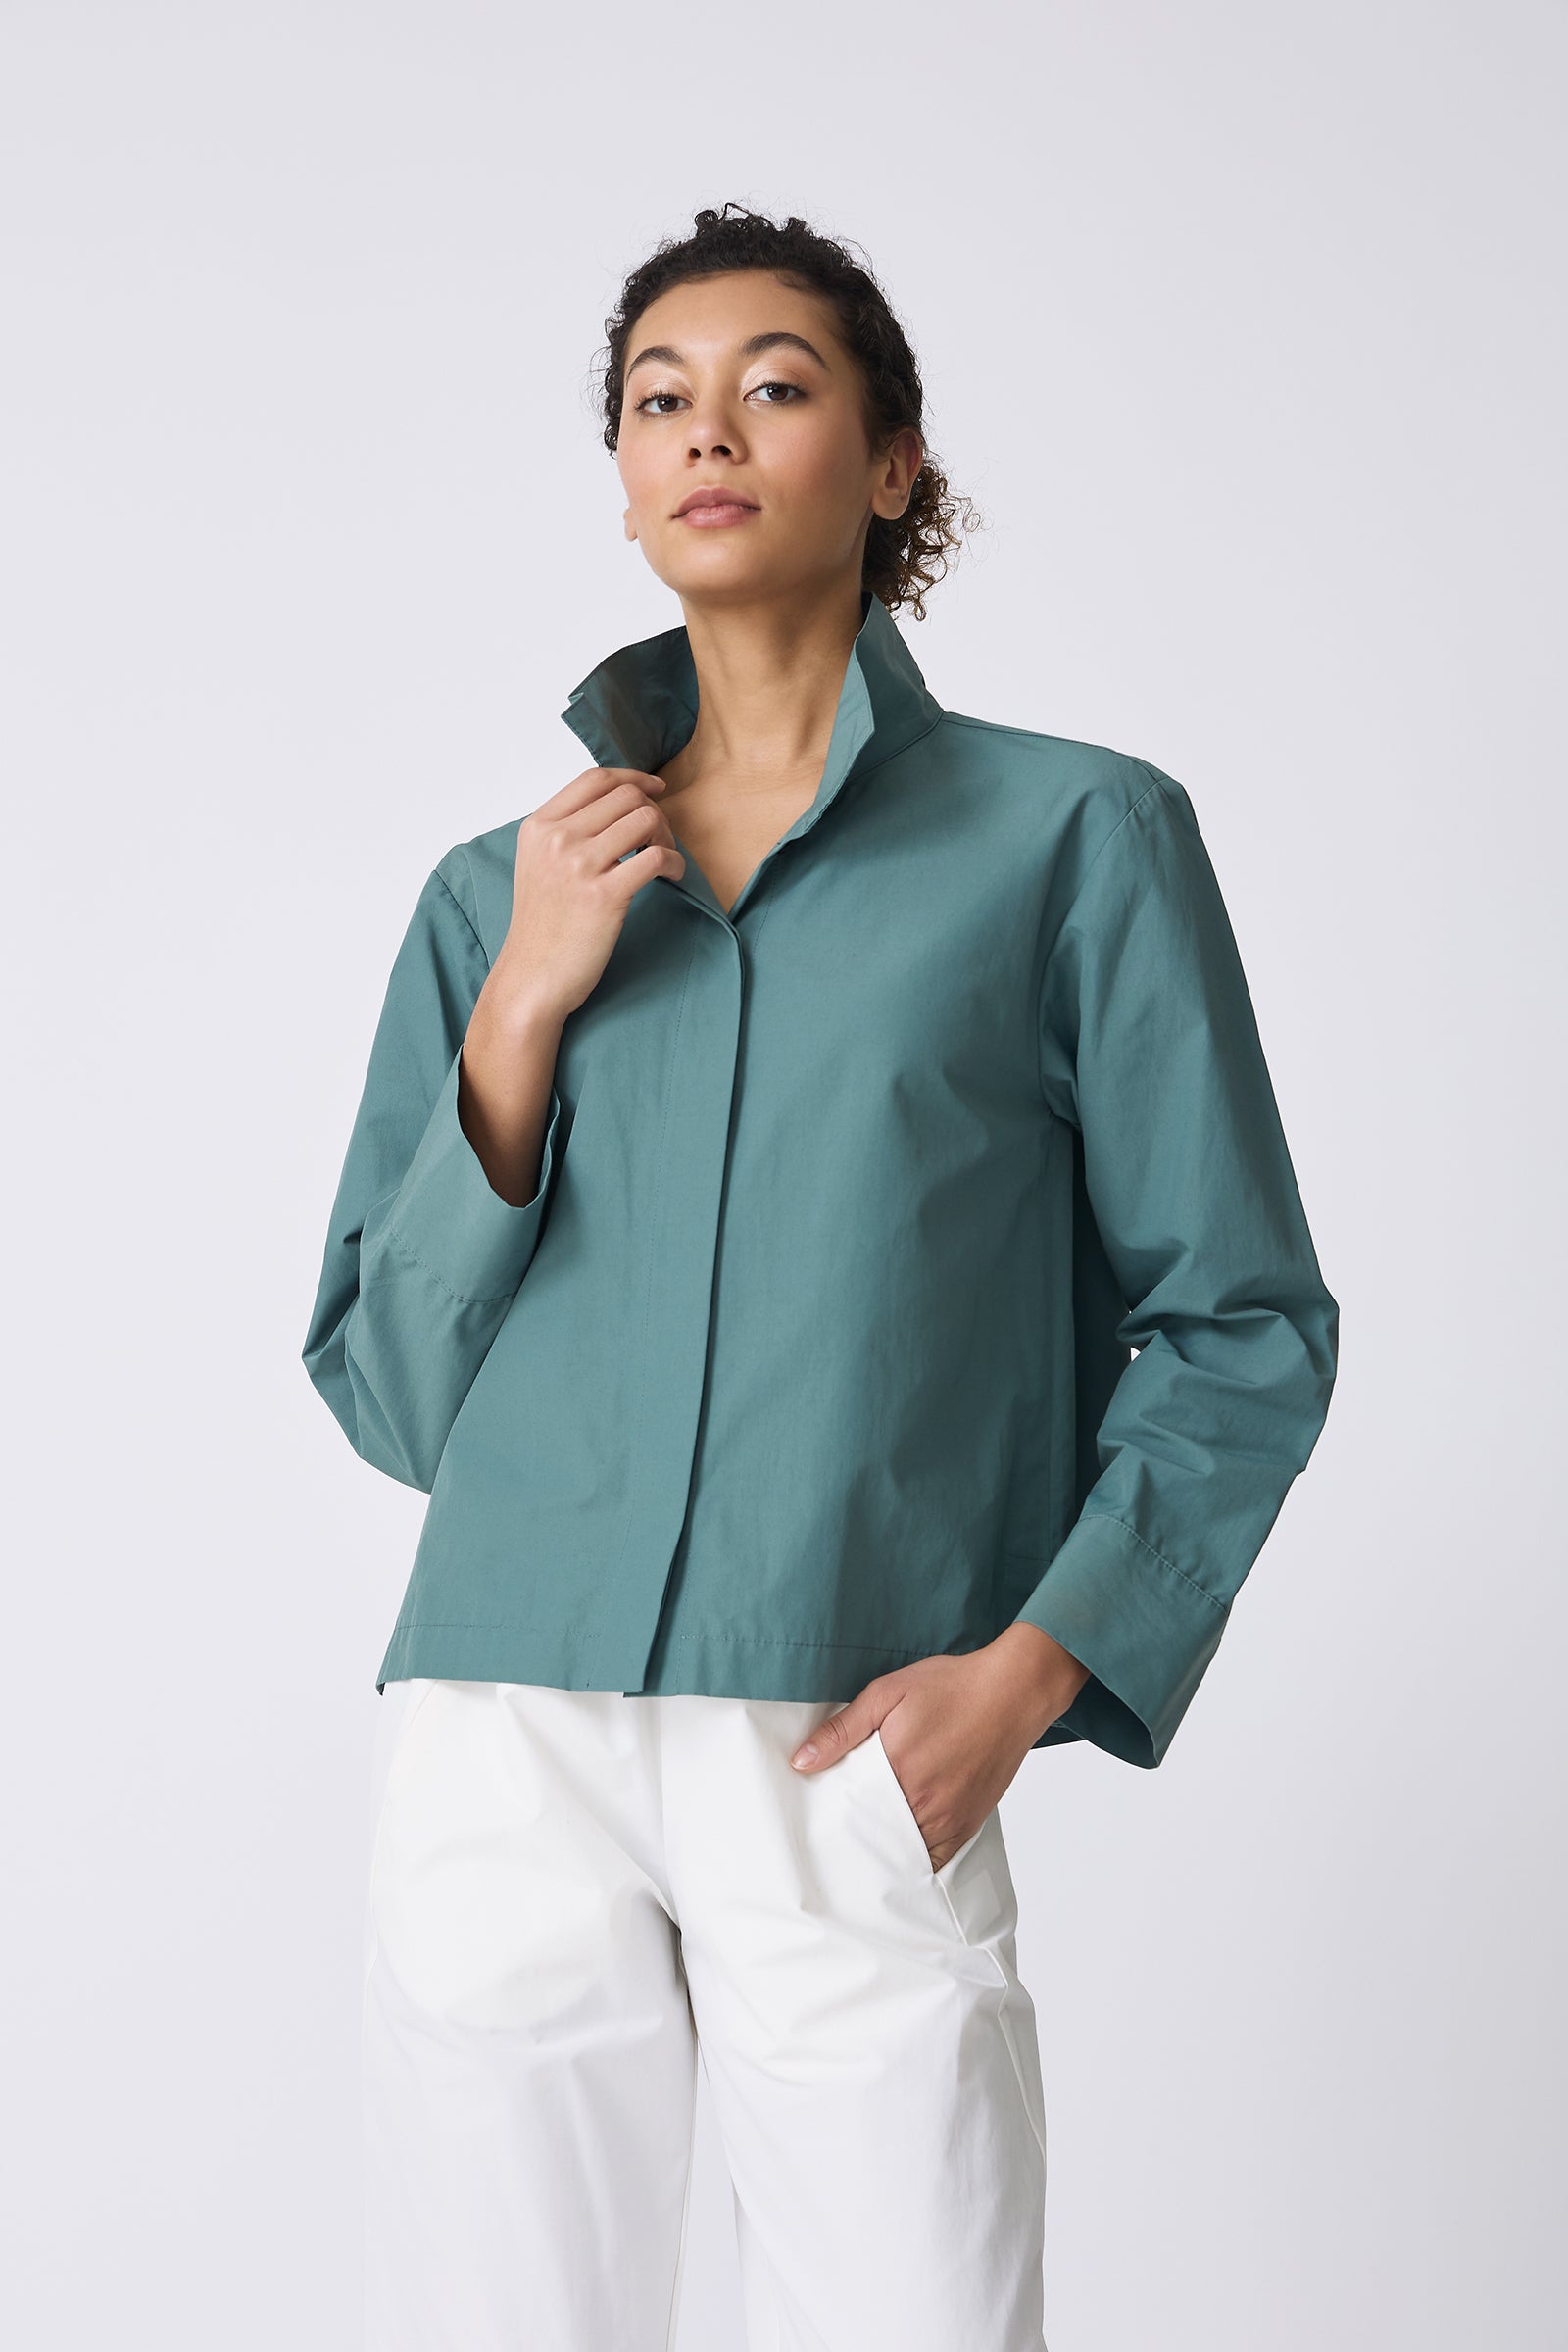 Kal Rieman Peggy Collared Shirt in Sage on model touching collar front view